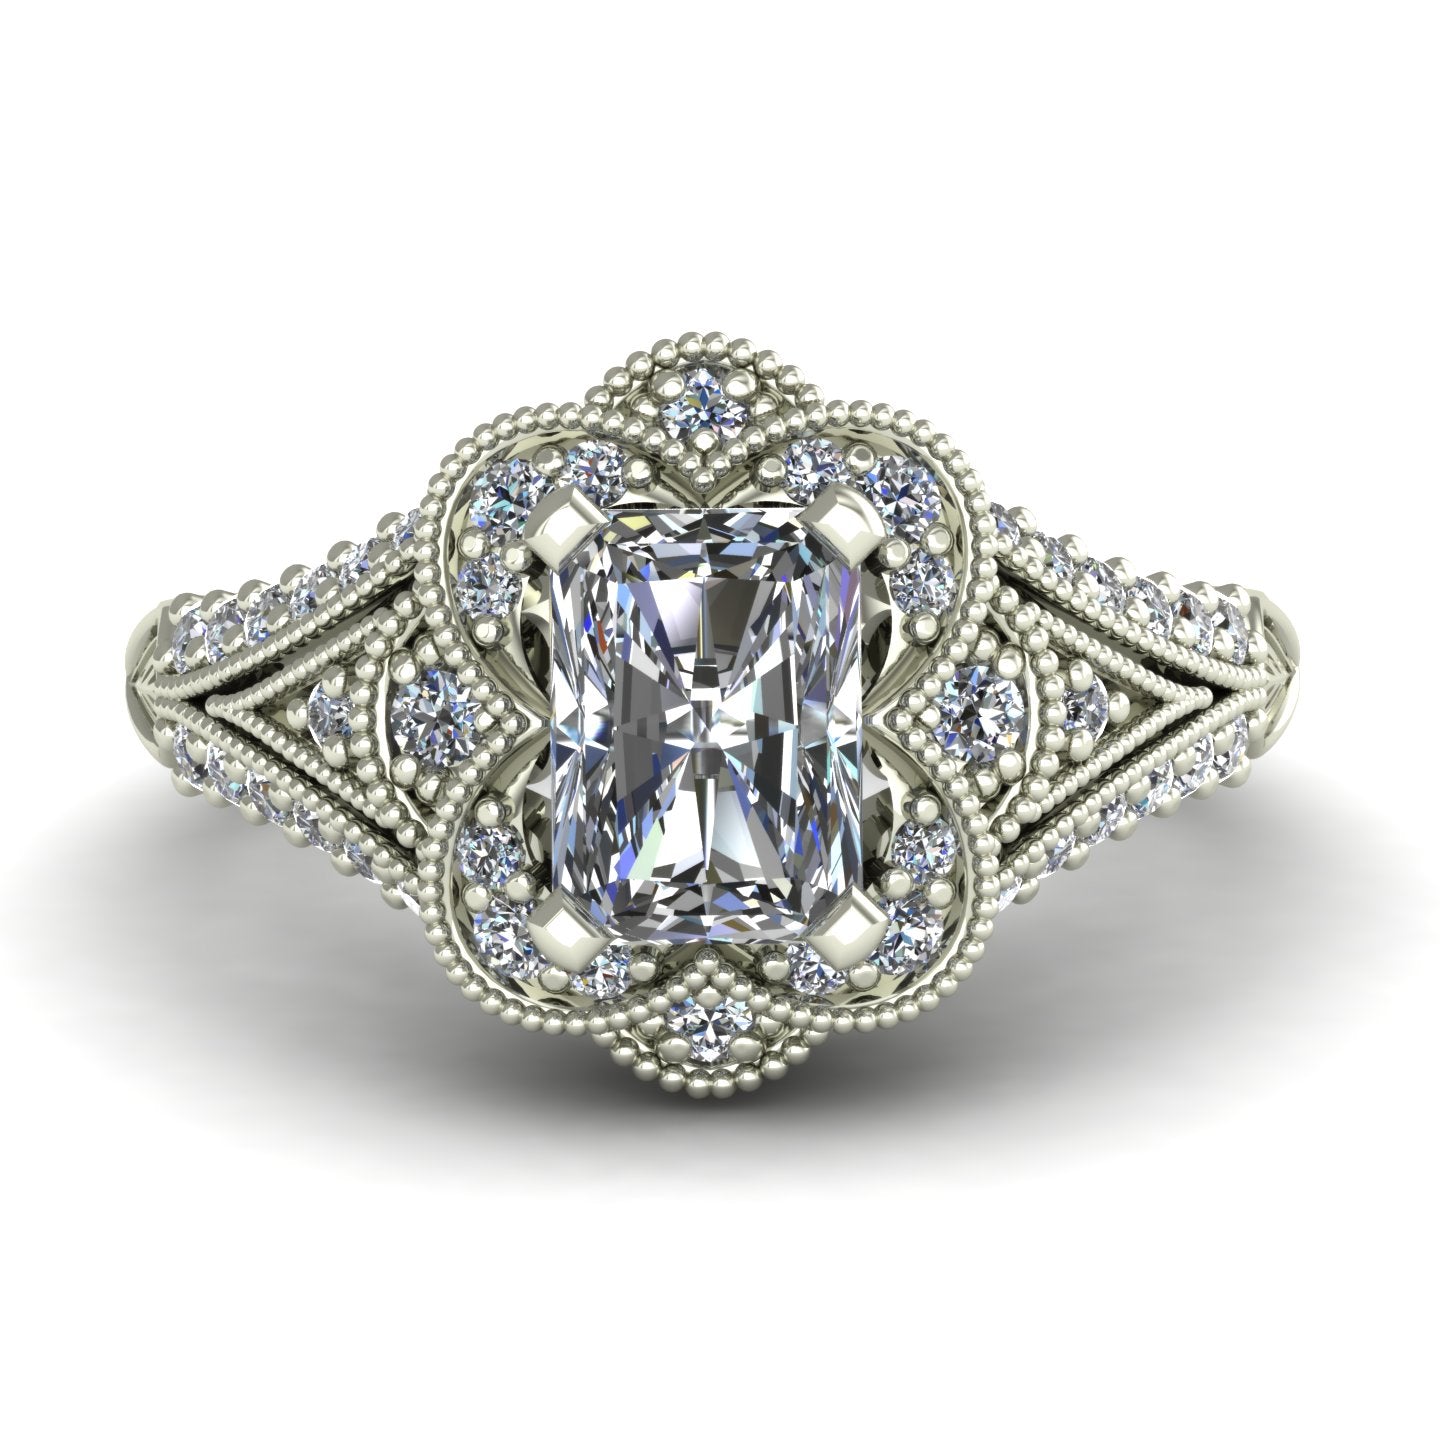 one carat radiant cut diamond scallop halo engagement ring in 14k white gold - Charles Babb Designs - top view